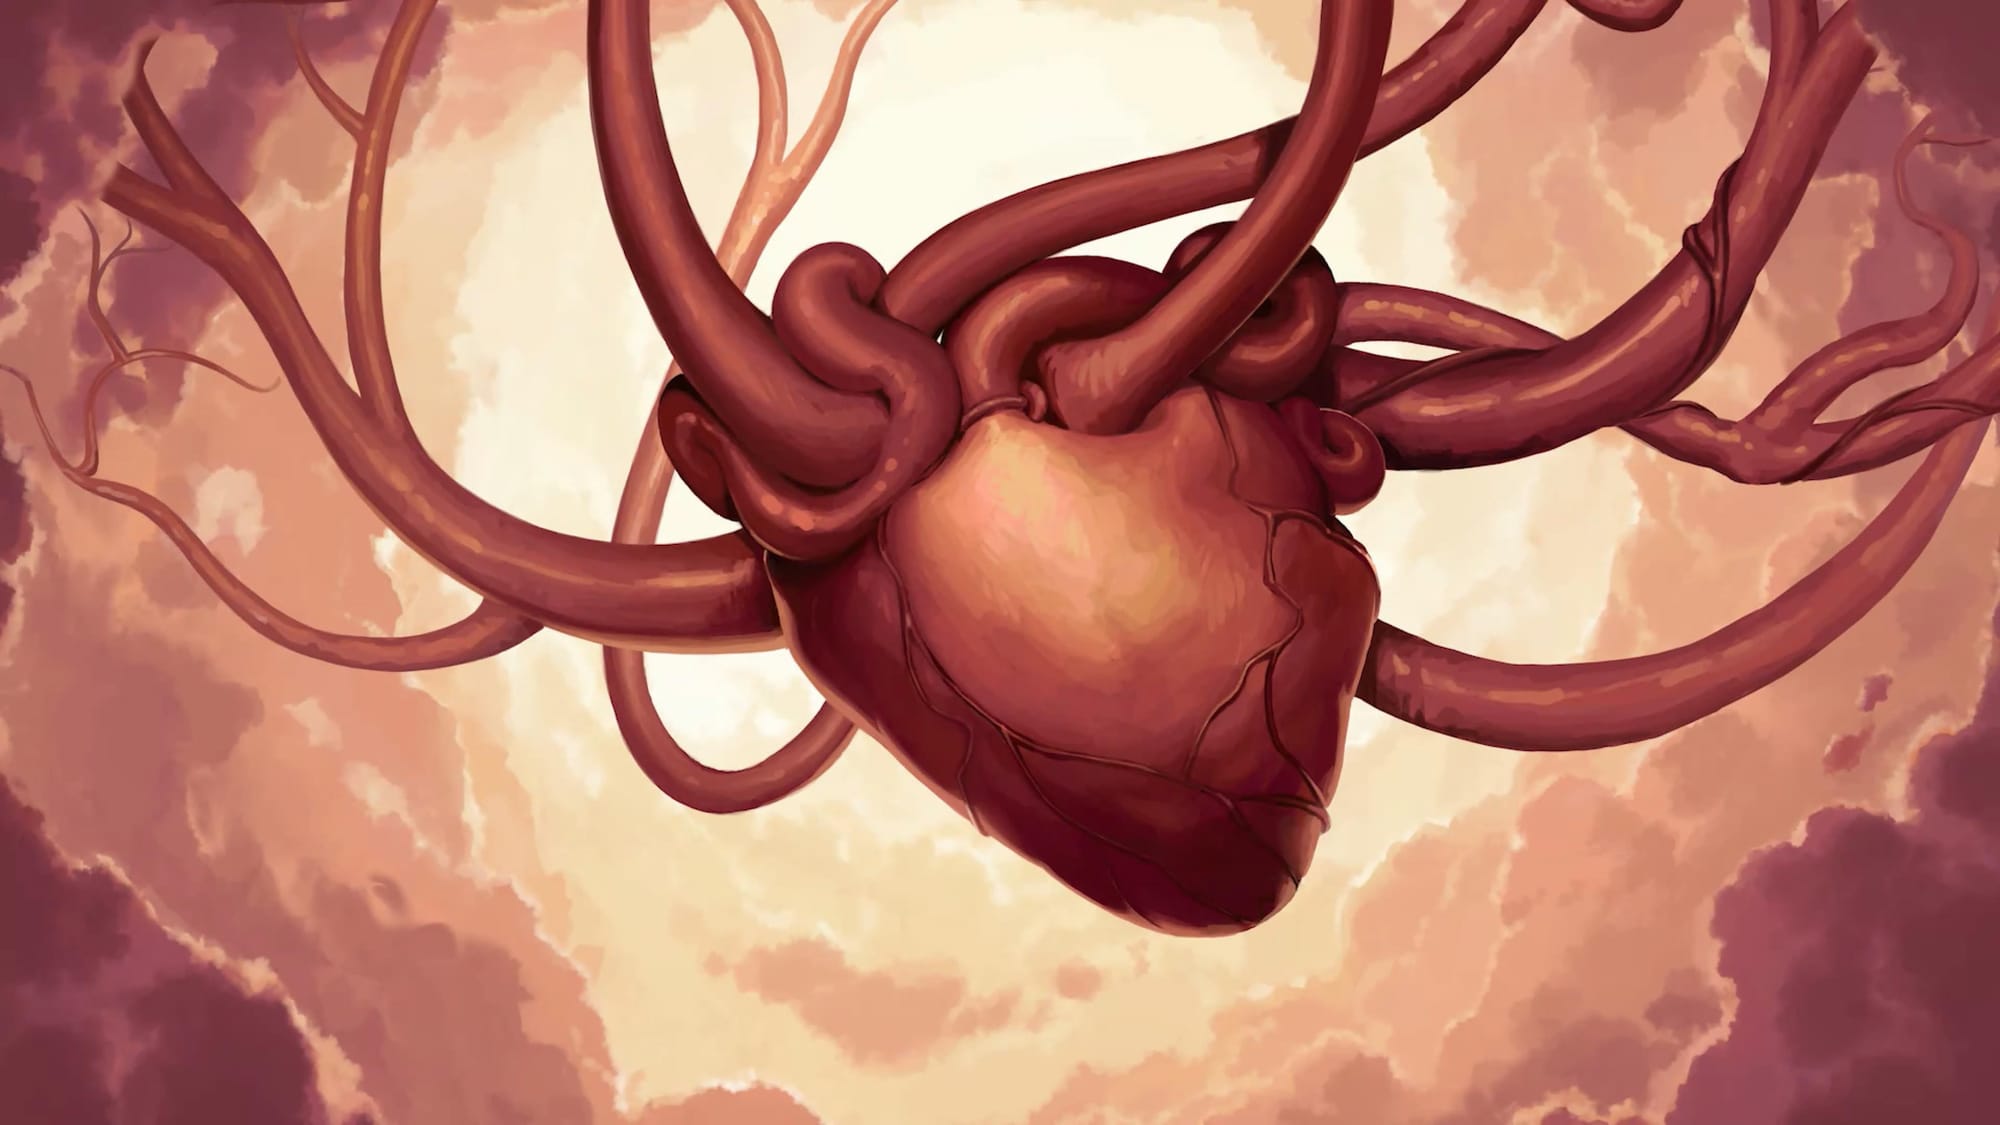 The screenshot from the game cinematic, depicting a gigantic hear in the skies with arteries reaching to all sides to the top.